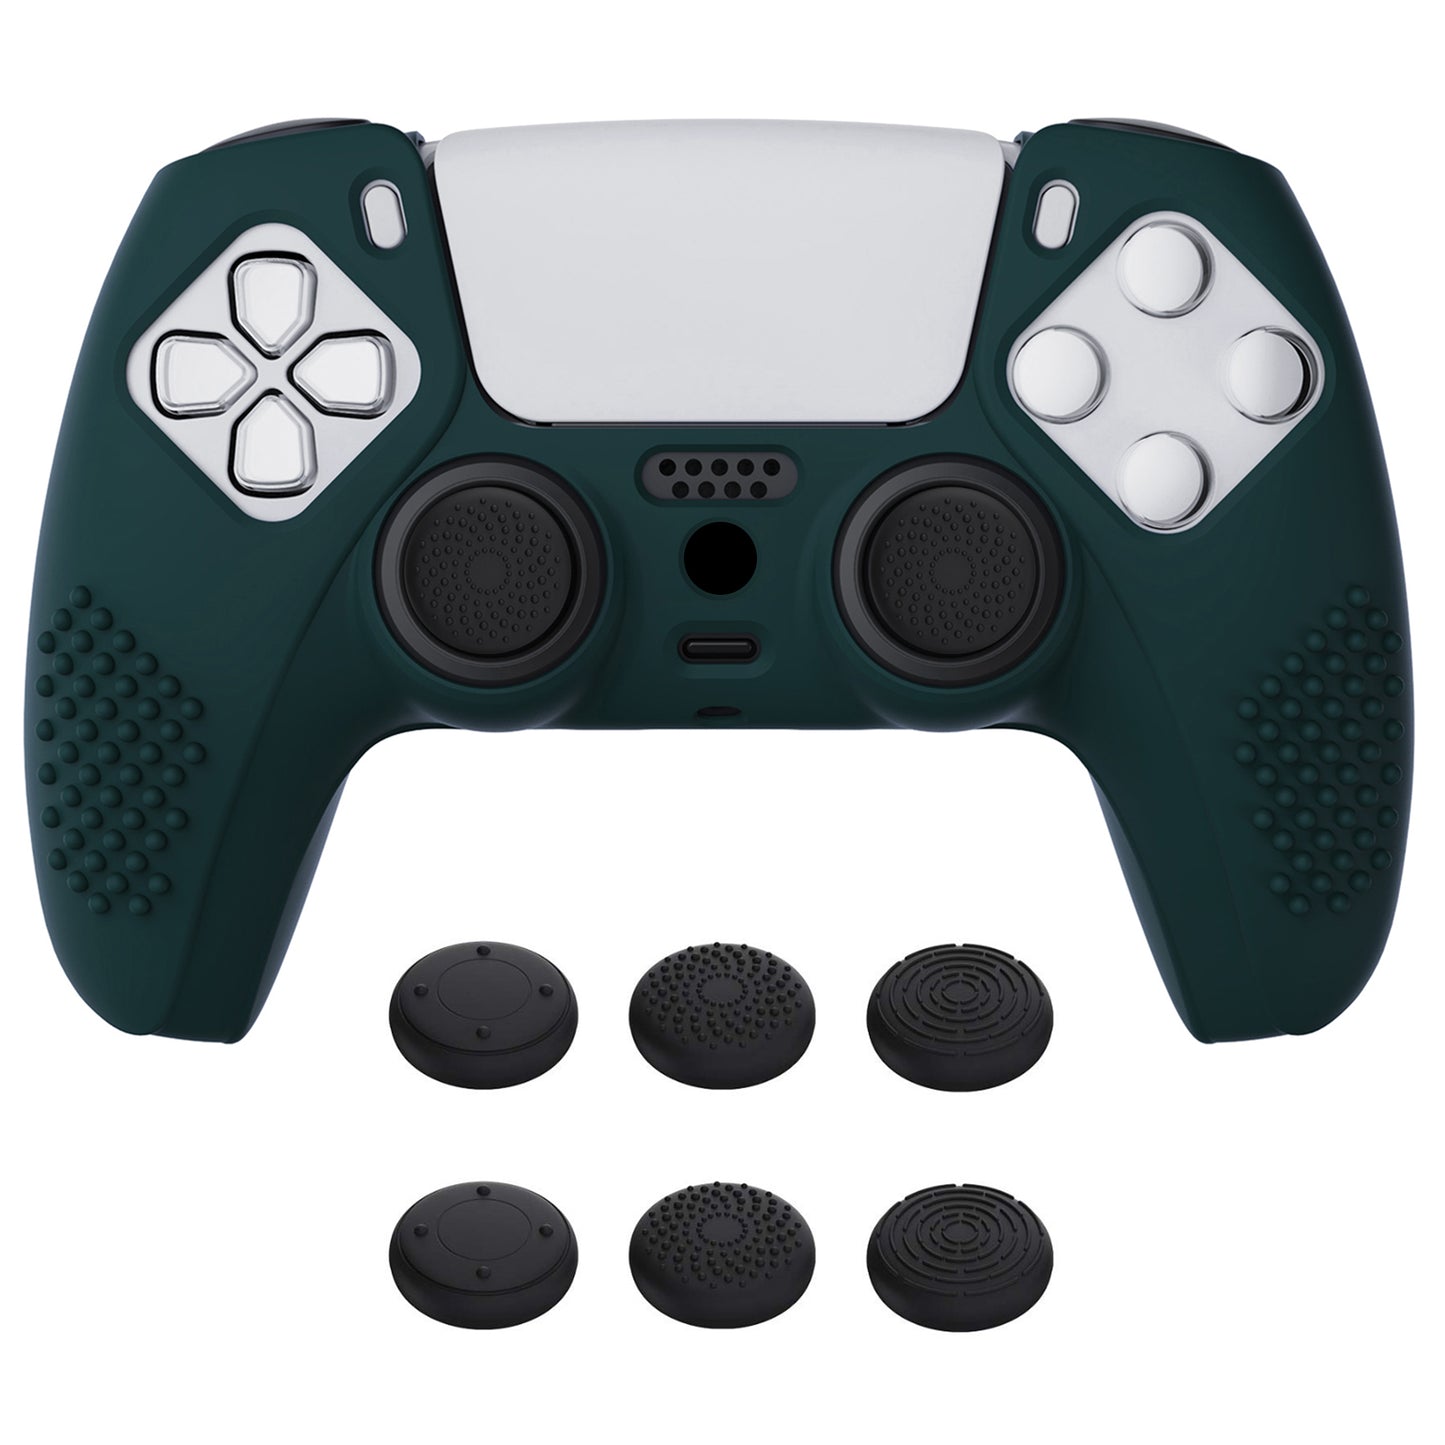 PlayVital 3D Studded Edition Anti-Slip Silicone Cover Skin with Thumb Grip Caps for PS5 Wireless Controller - Racing Green - TDPF004 PlayVital